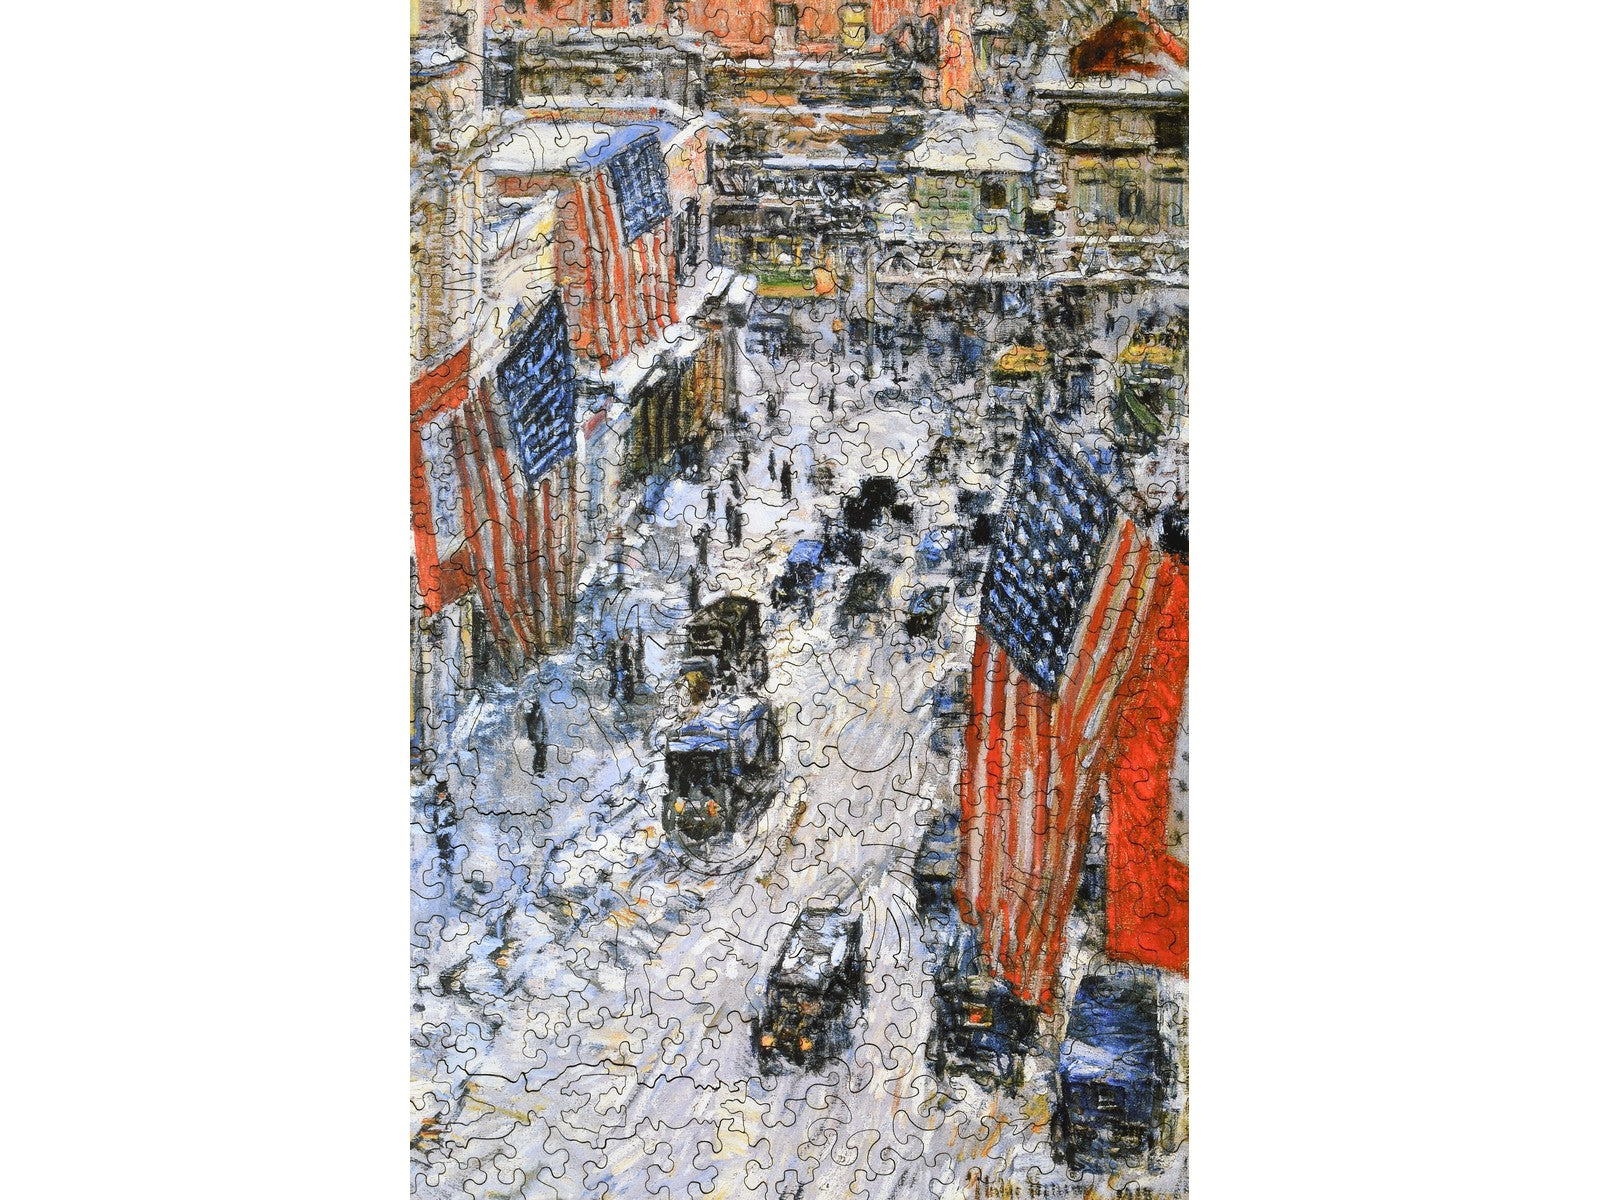 The front of the puzzle, Flags on 57th Street, Winter 1918, which shows a snowy street in Ney York City, with American flags flying from buildings.